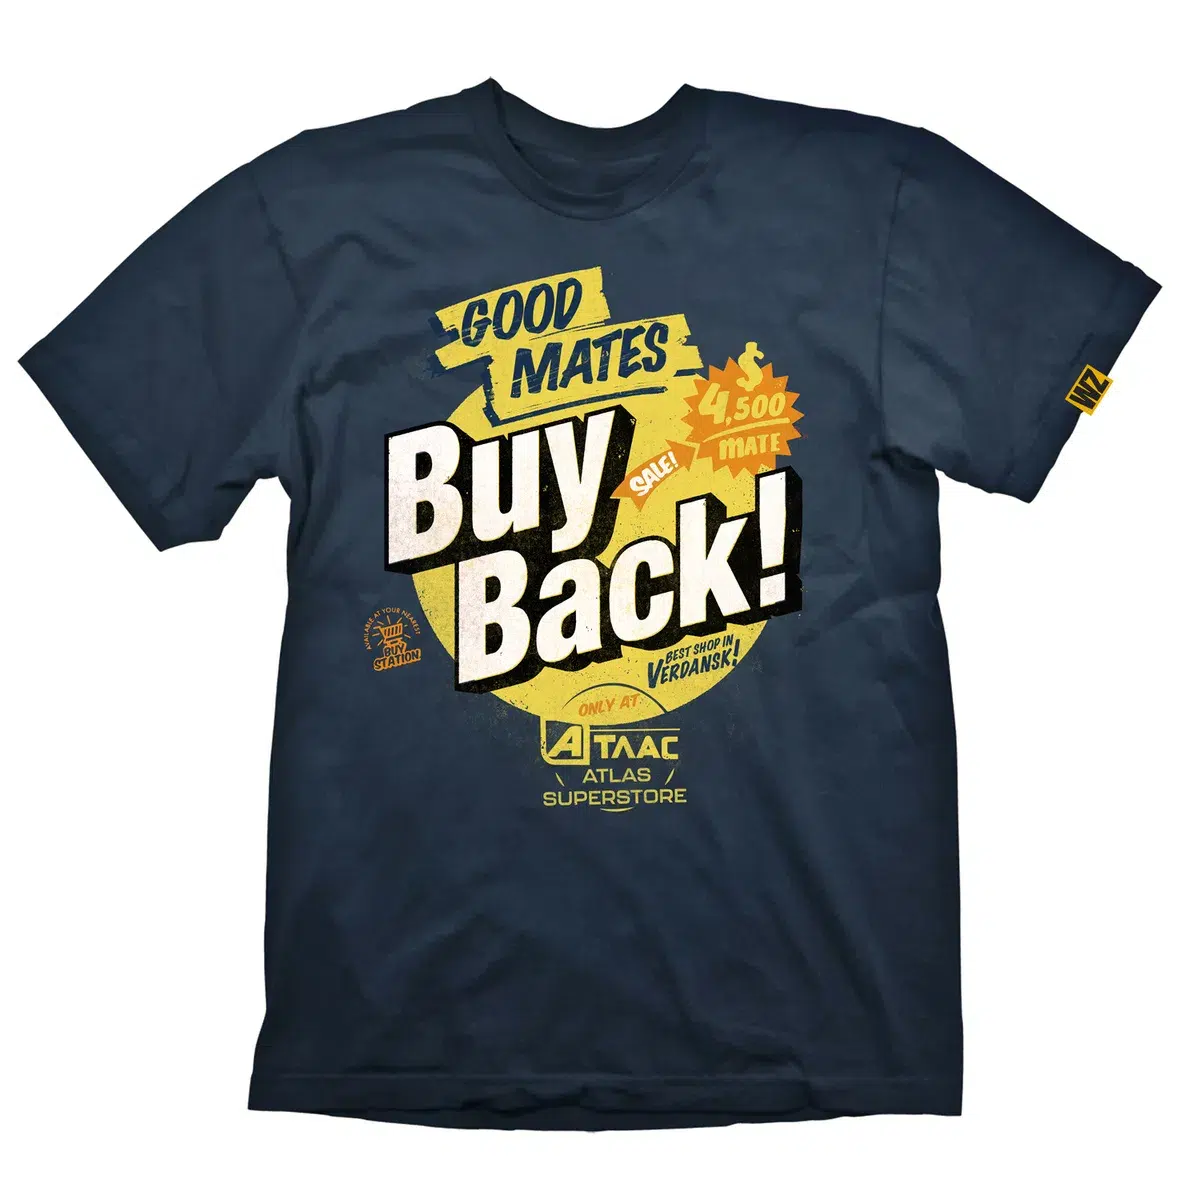 Call of Duty Warzone T-Shirt "Buy Back" French Navy